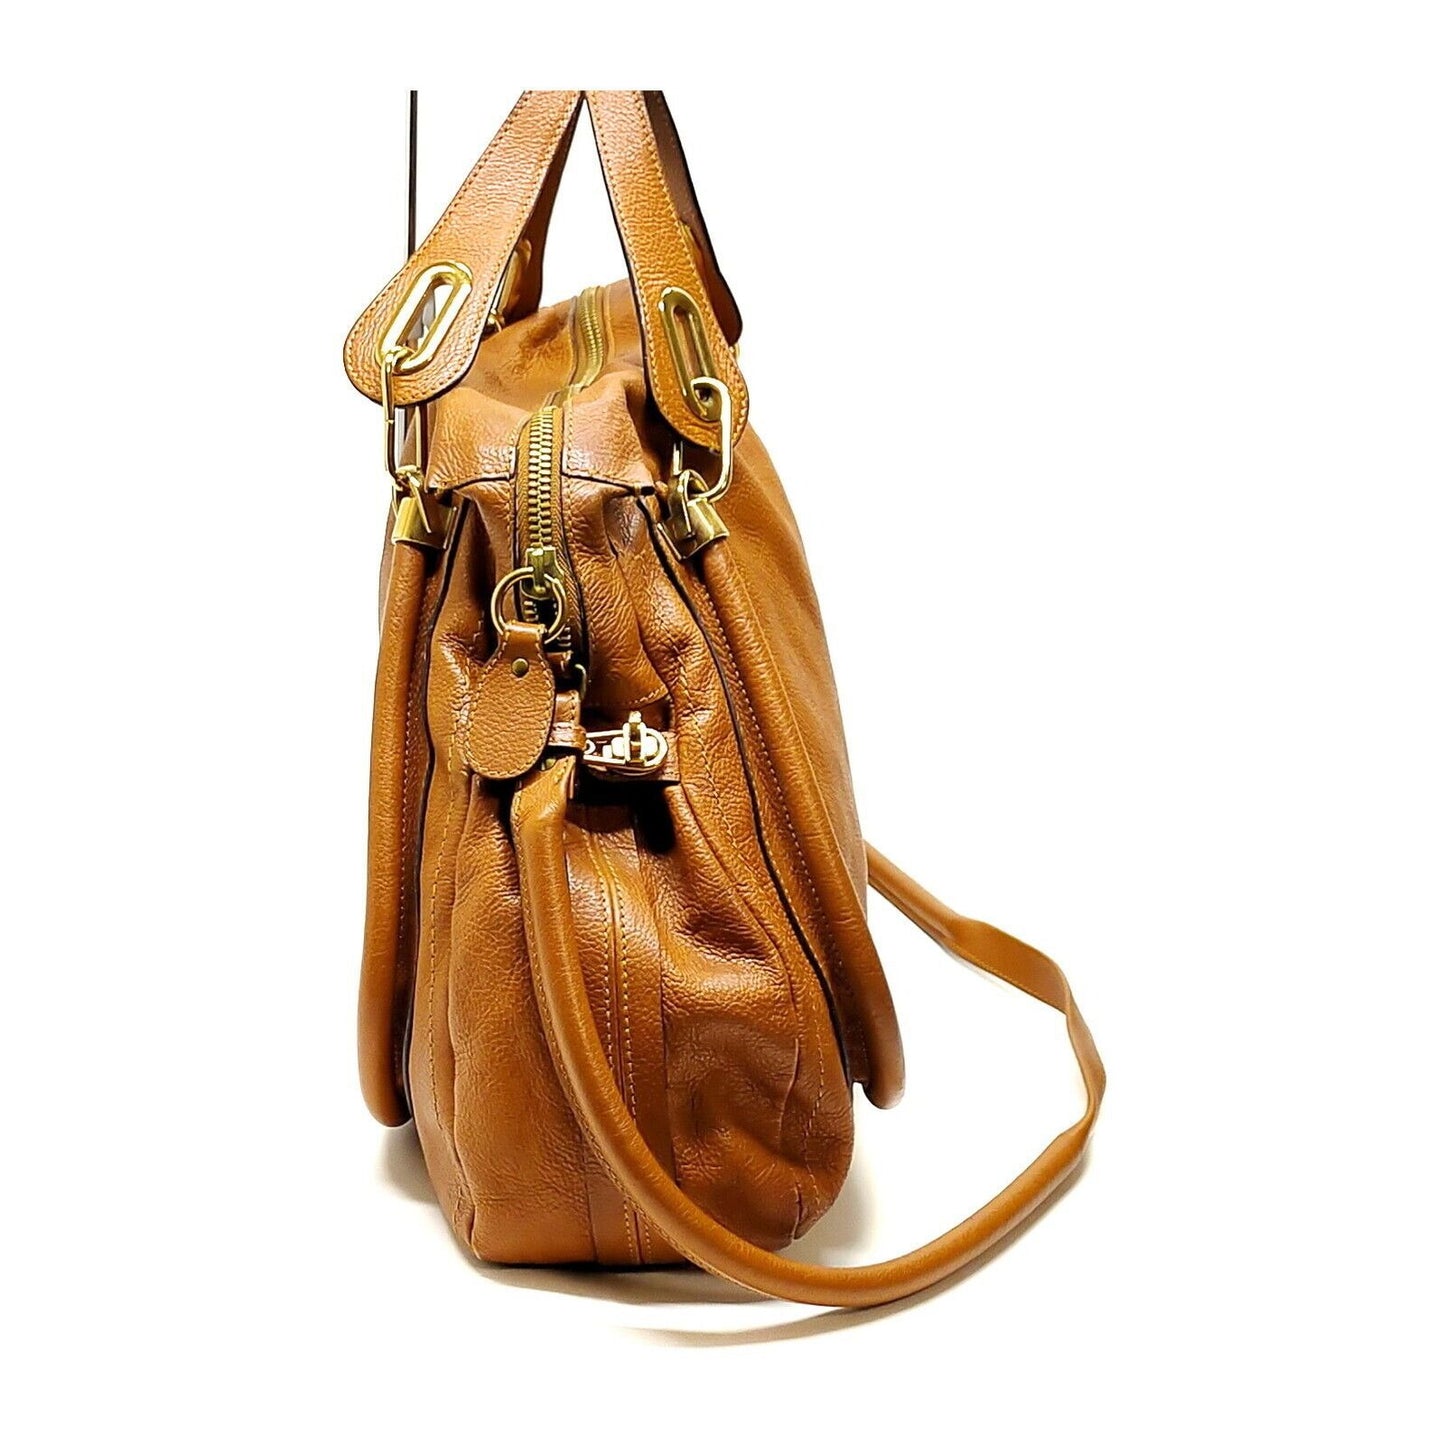 Chloé 'Paraty' style camel leather top zip two-way bag